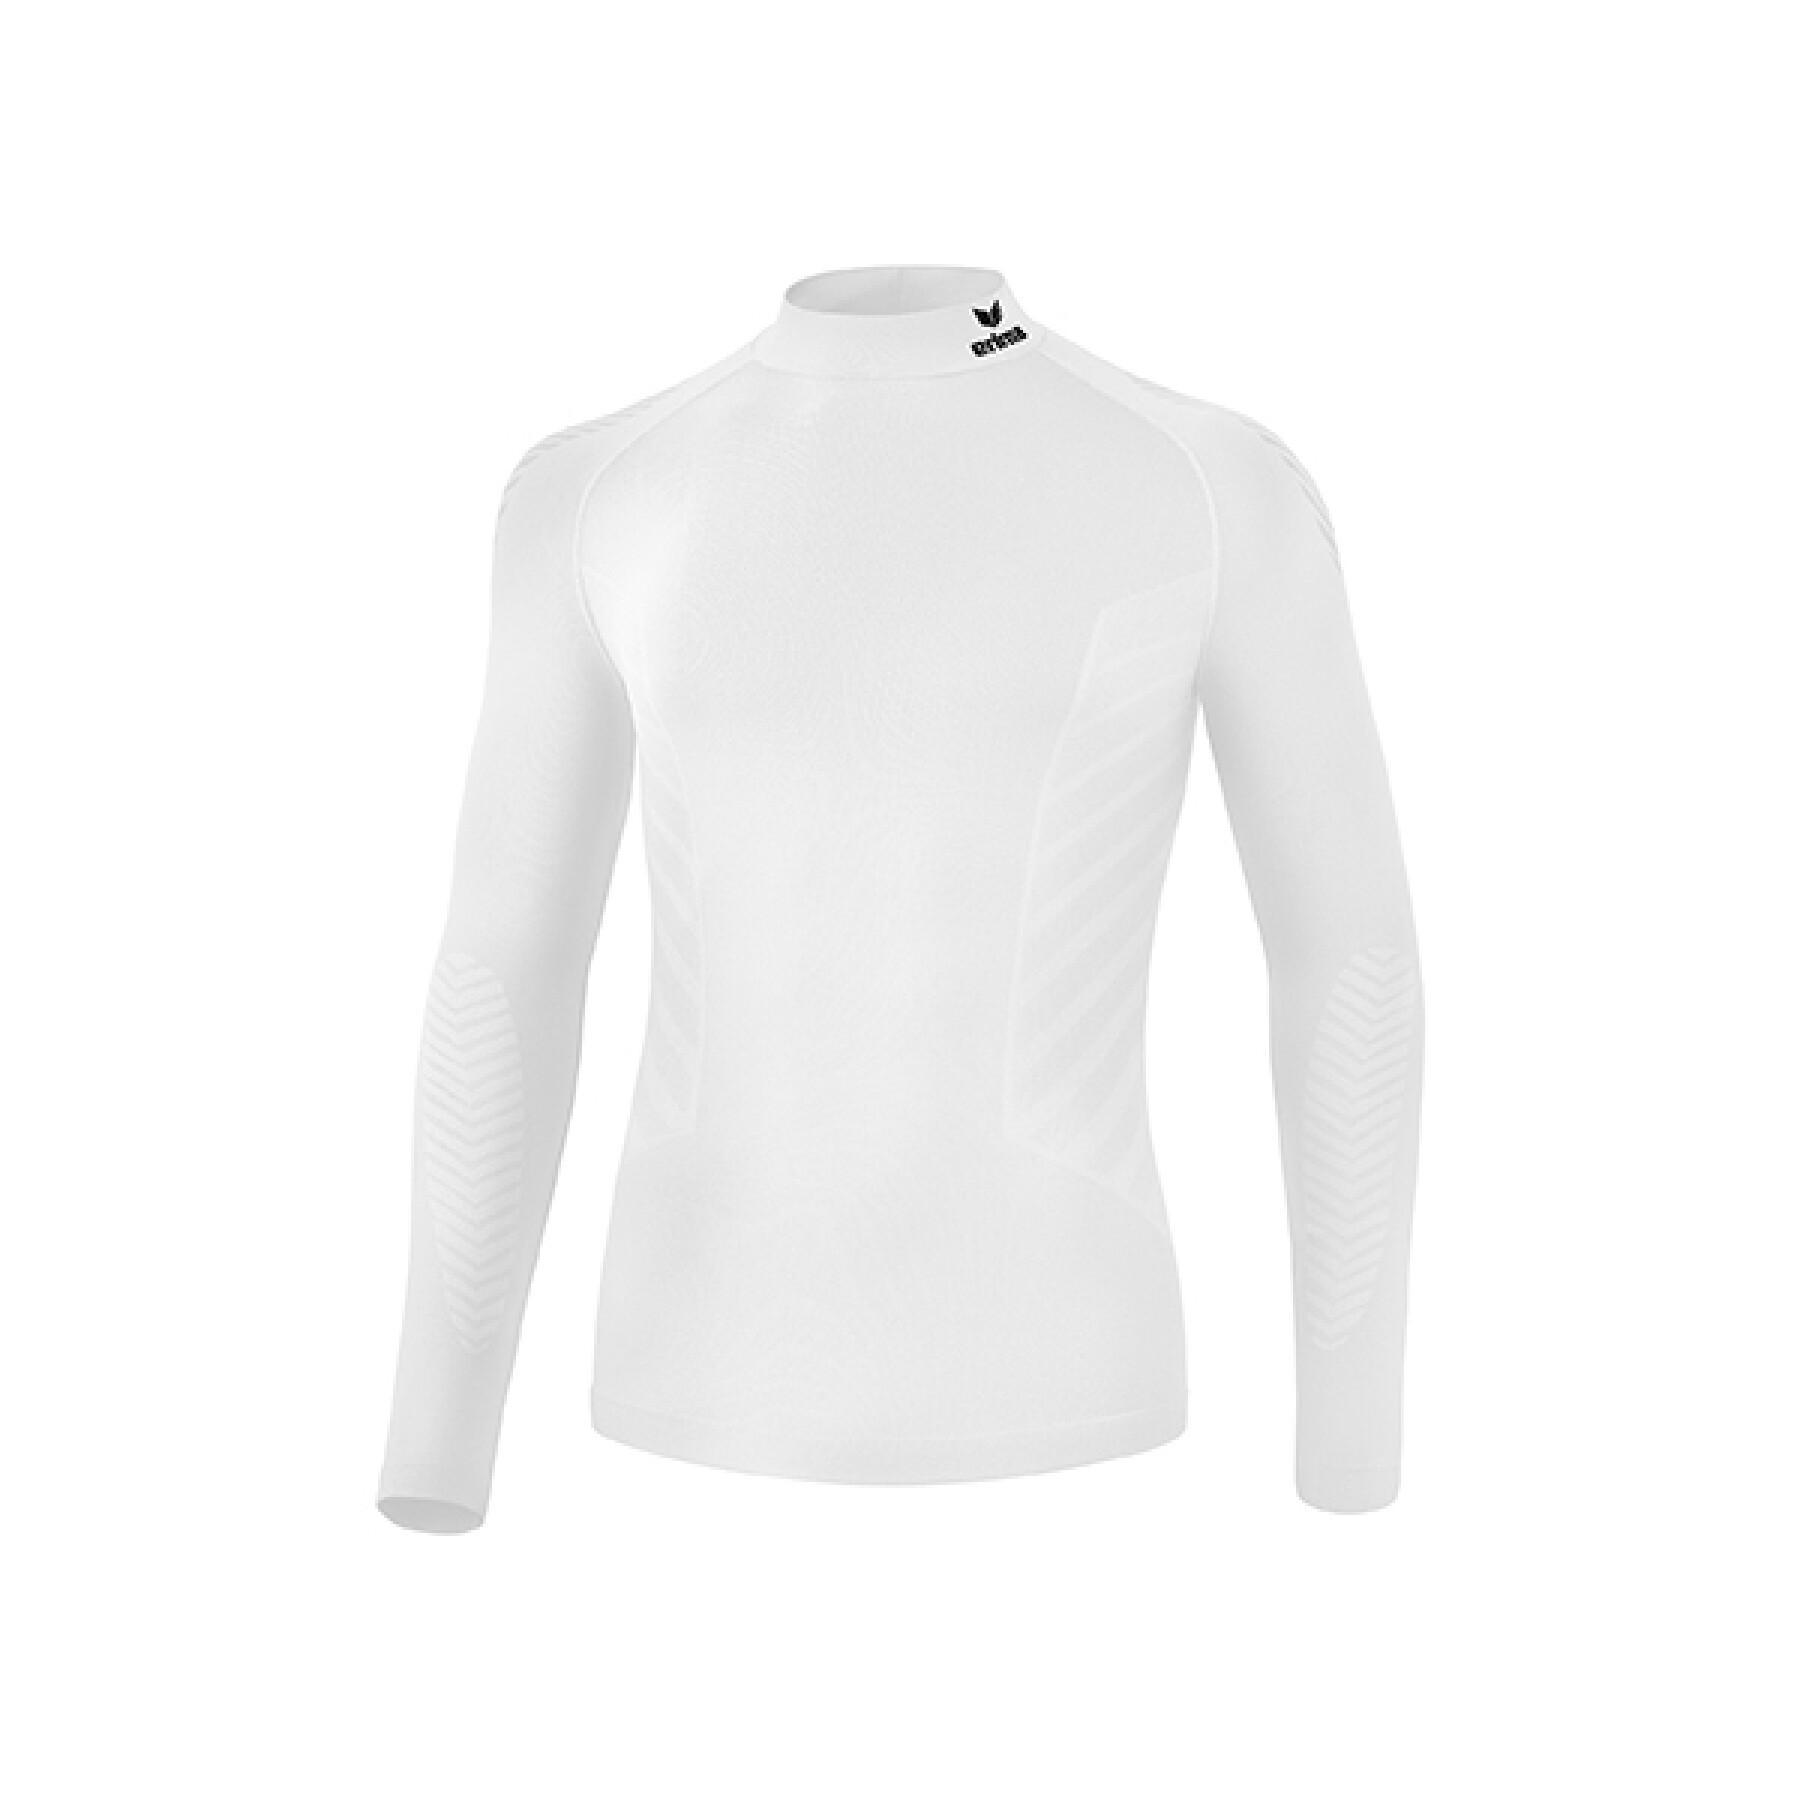 Long sleeve compression jersey with high neck Erima Athletic - Erima -  Brands - Handball wear